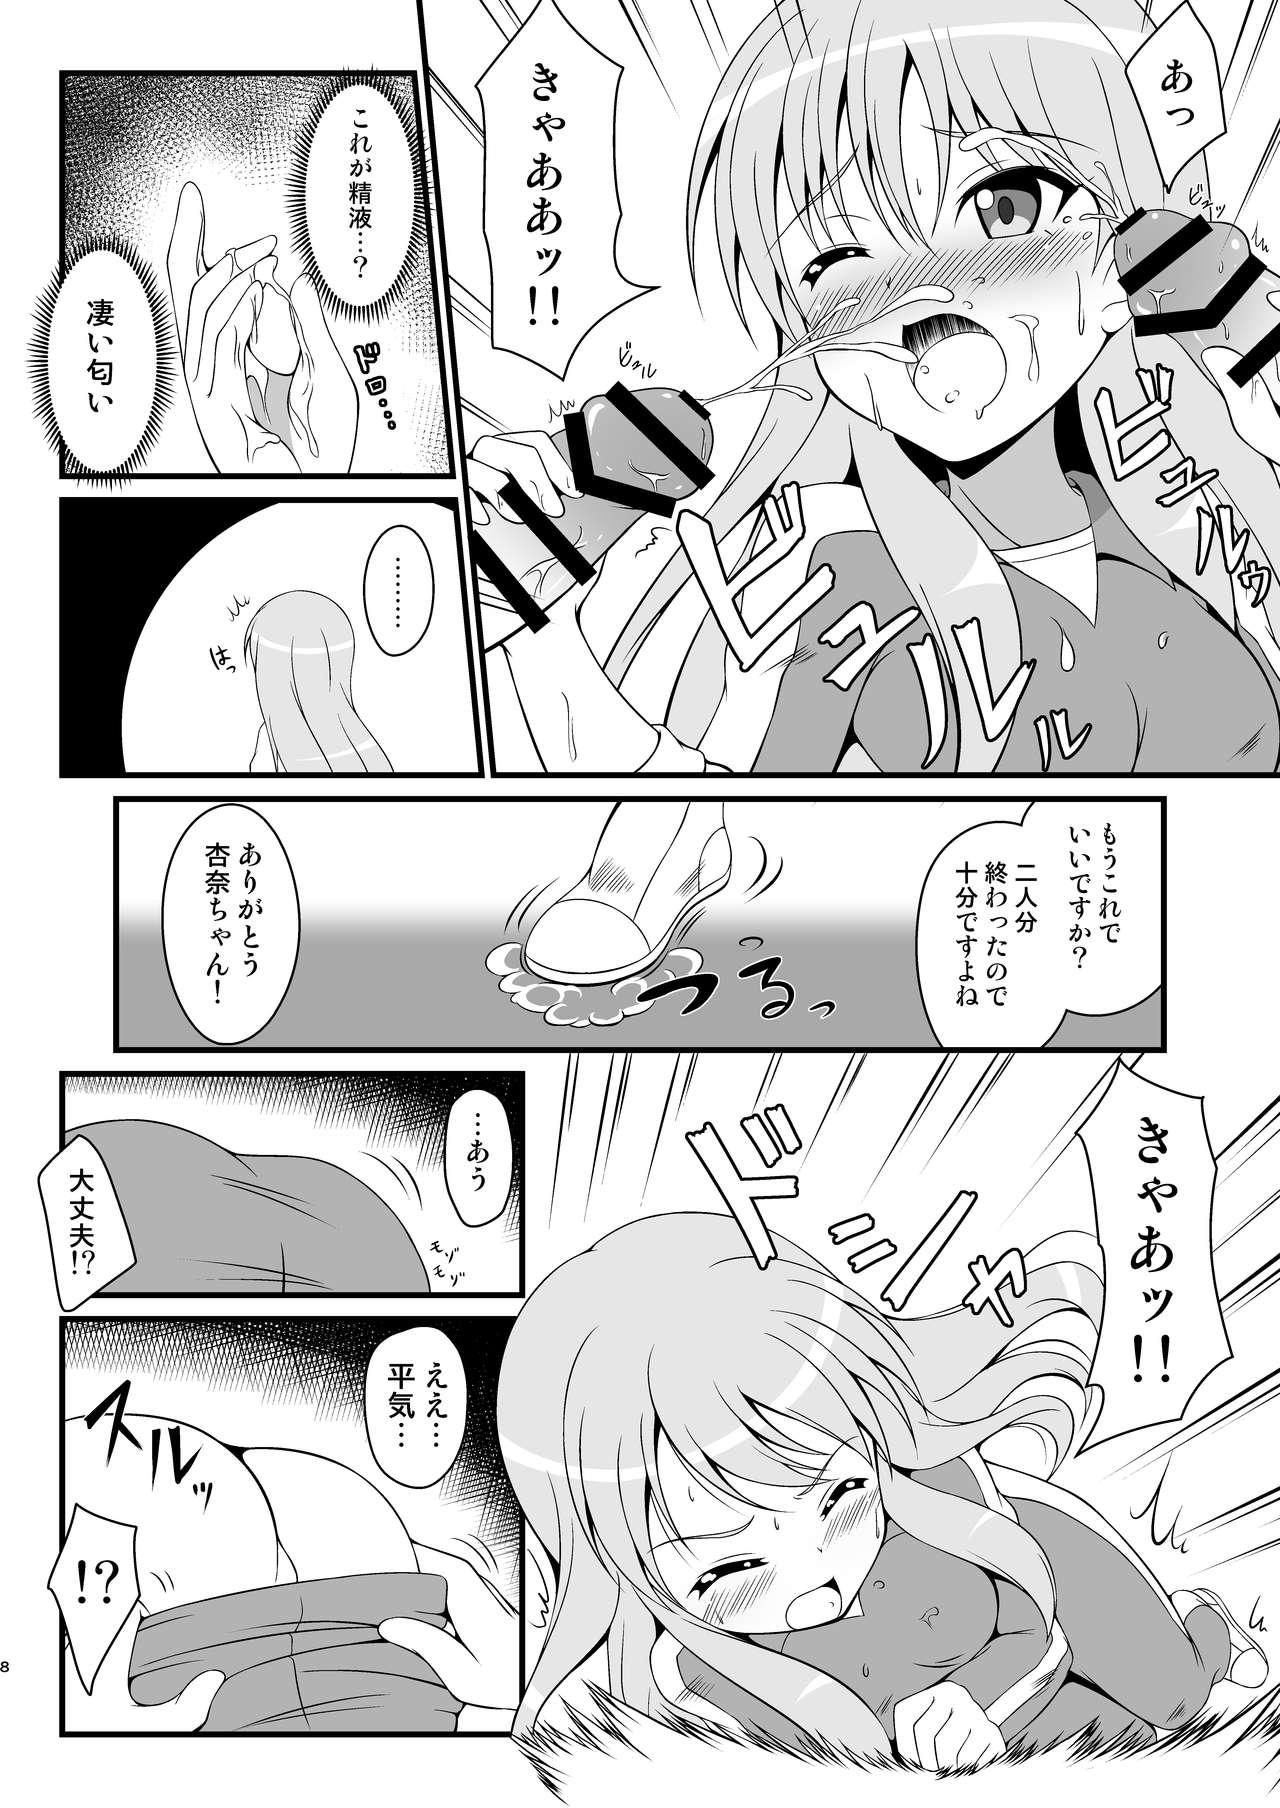 Hotel Girls Eleven A - Inazuma eleven Gay Blondhair - Page 7